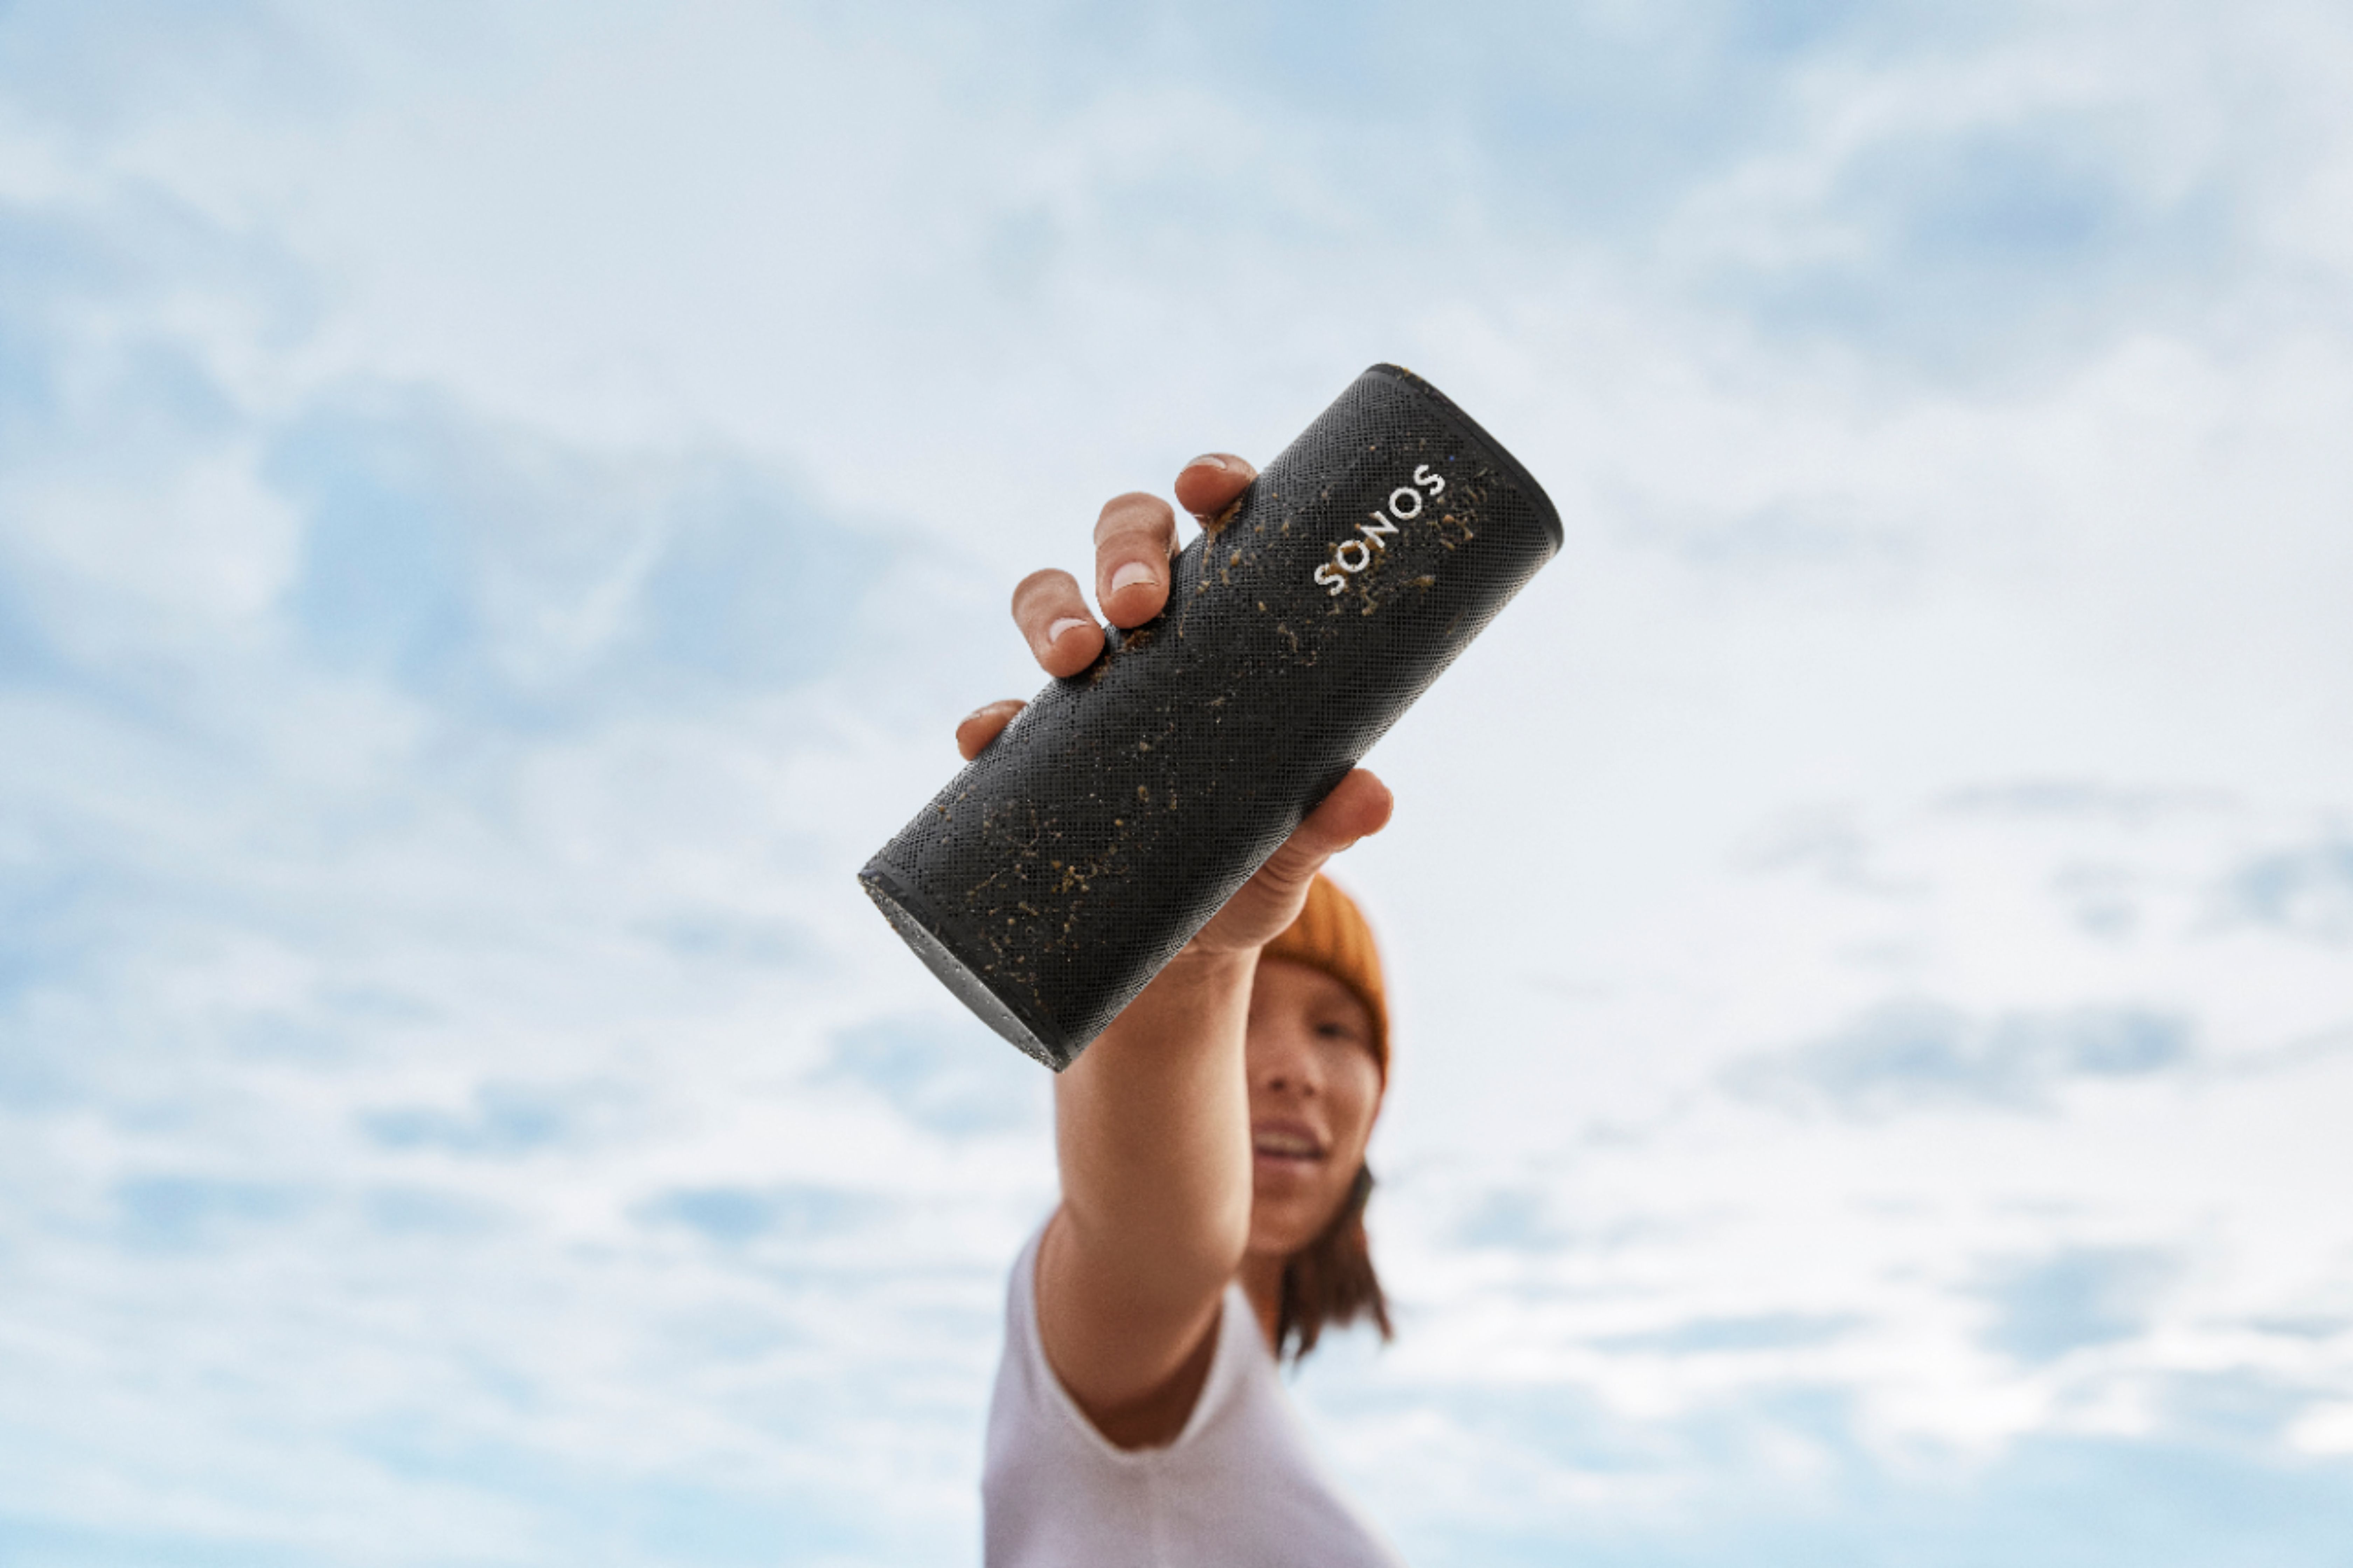 Sonos Roam Smart Portable Wi-Fi and Bluetooth Speaker with  Alexa and  Google Assistant - Black - Micro Center